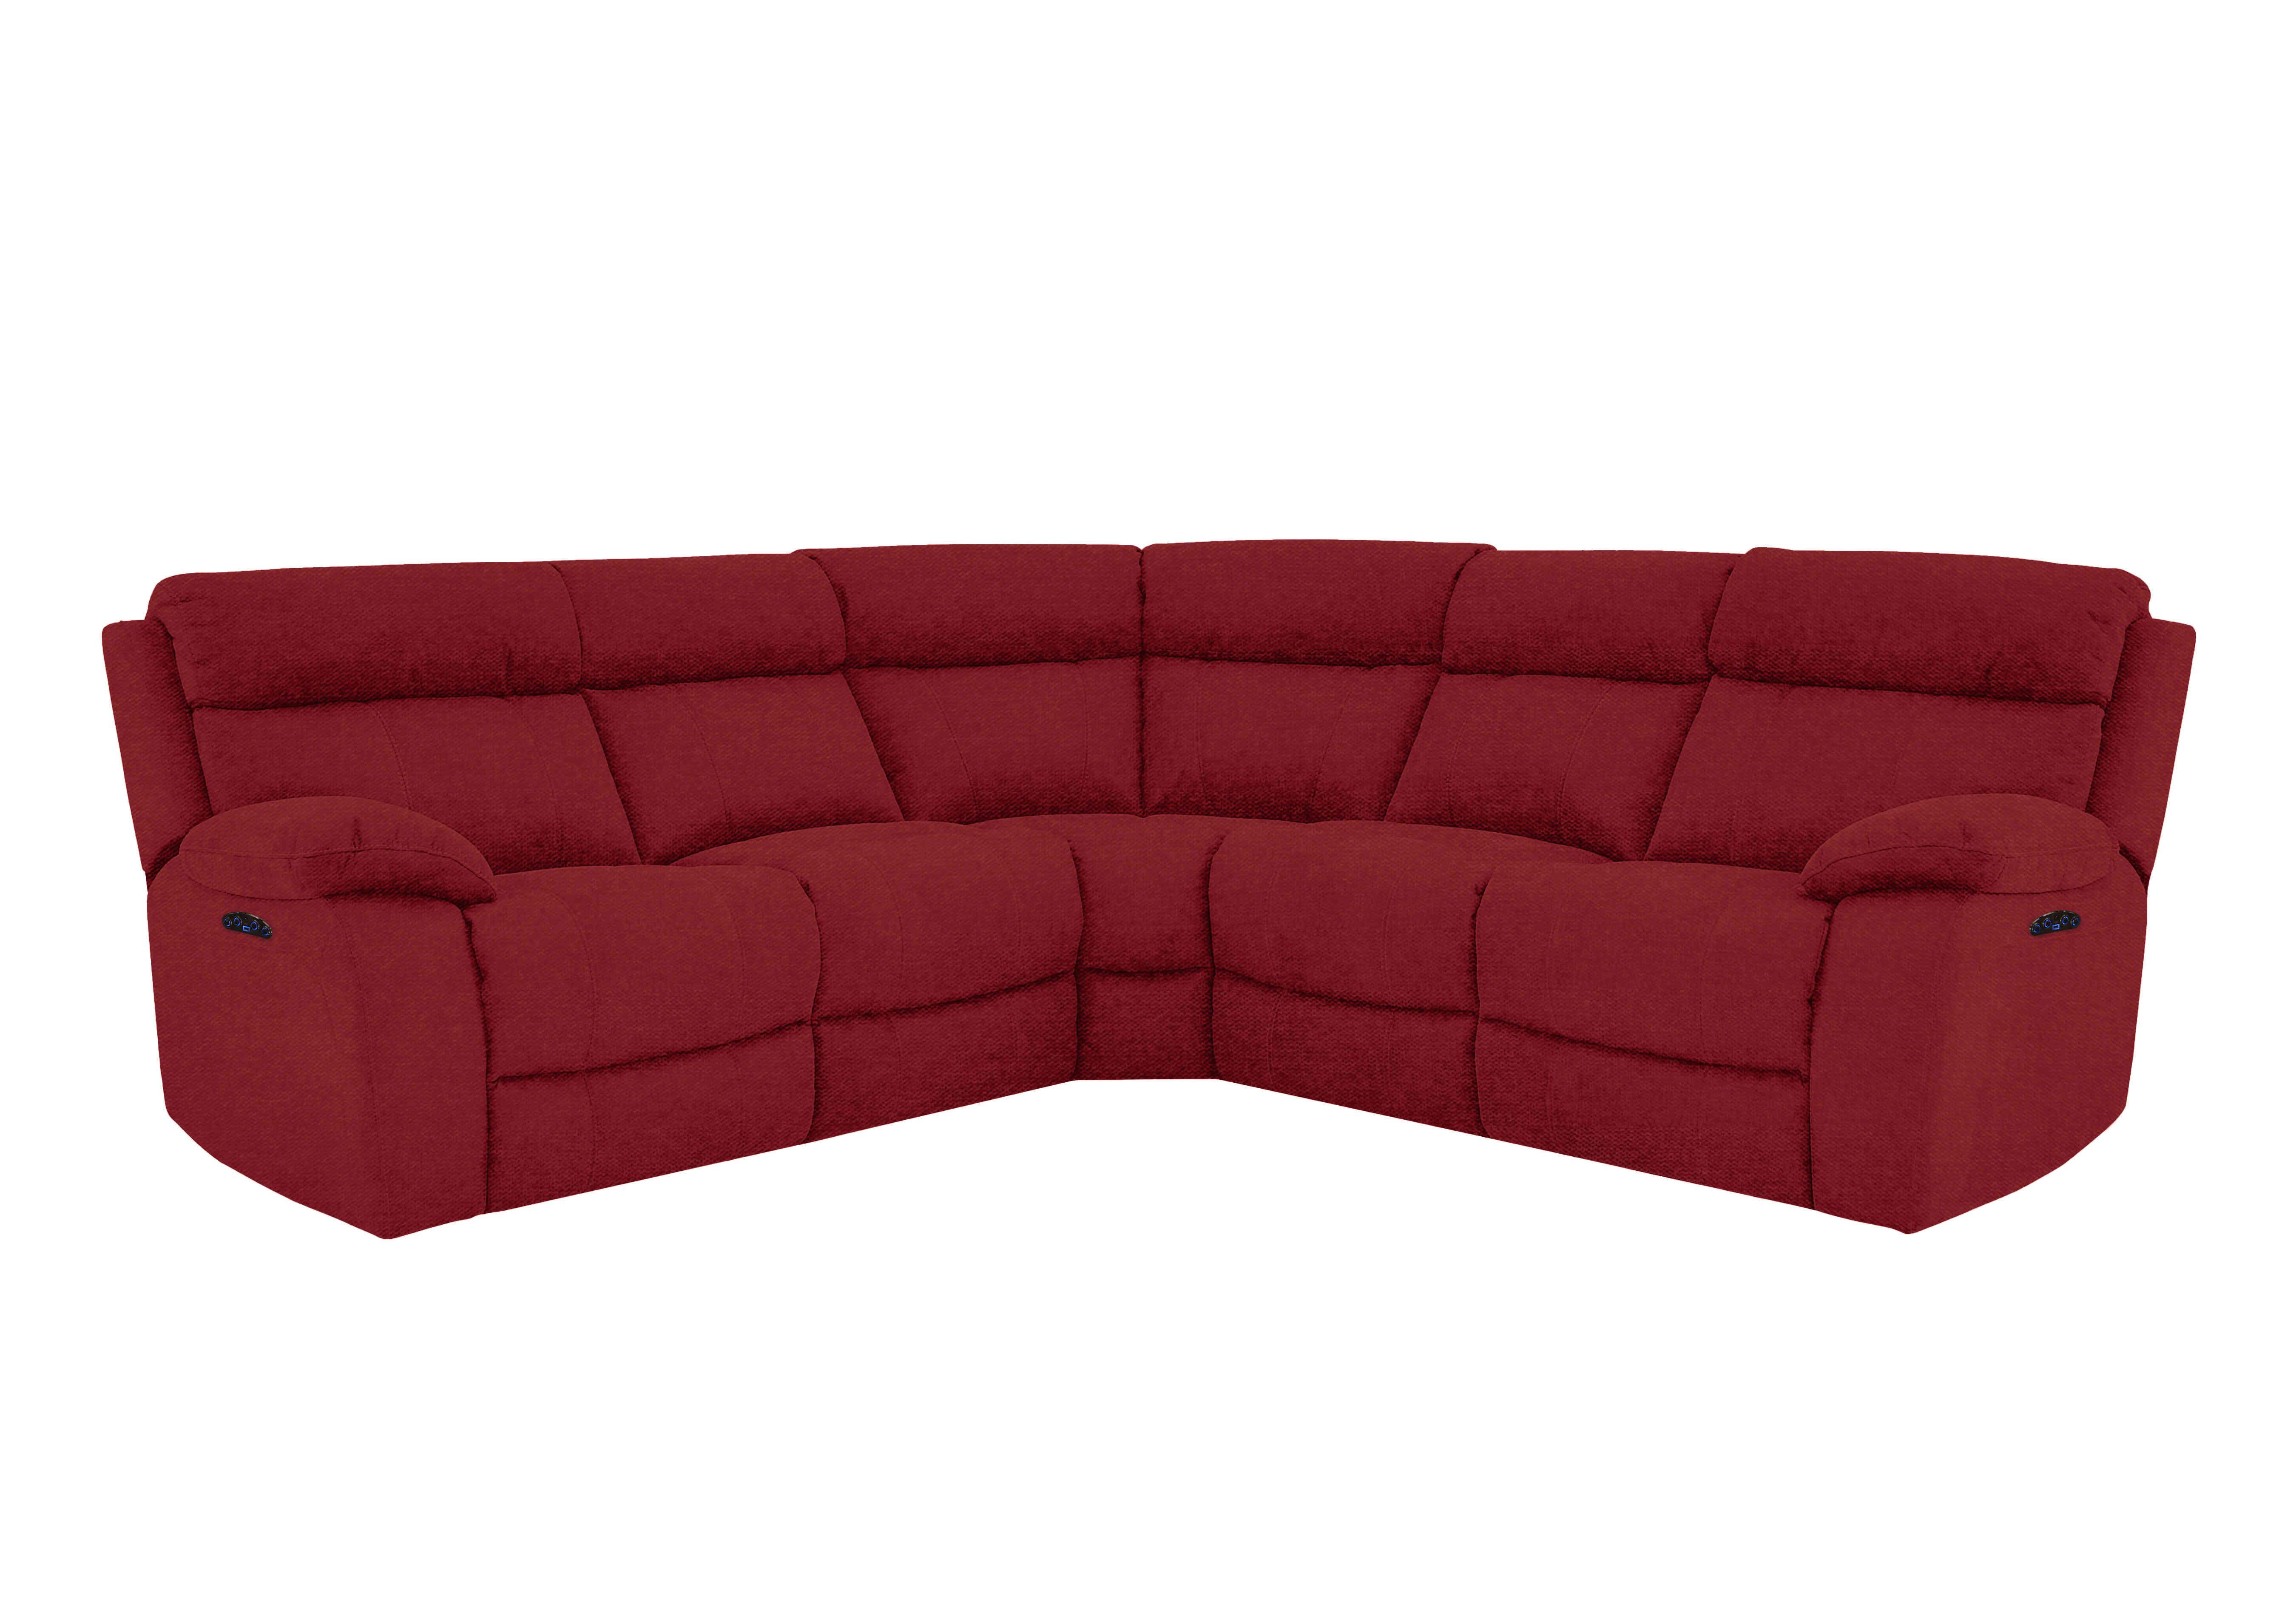 Moreno Fabric Power Recliner Corner Sofa with Power Headrests in Fab-Blt-R29 Red on Furniture Village